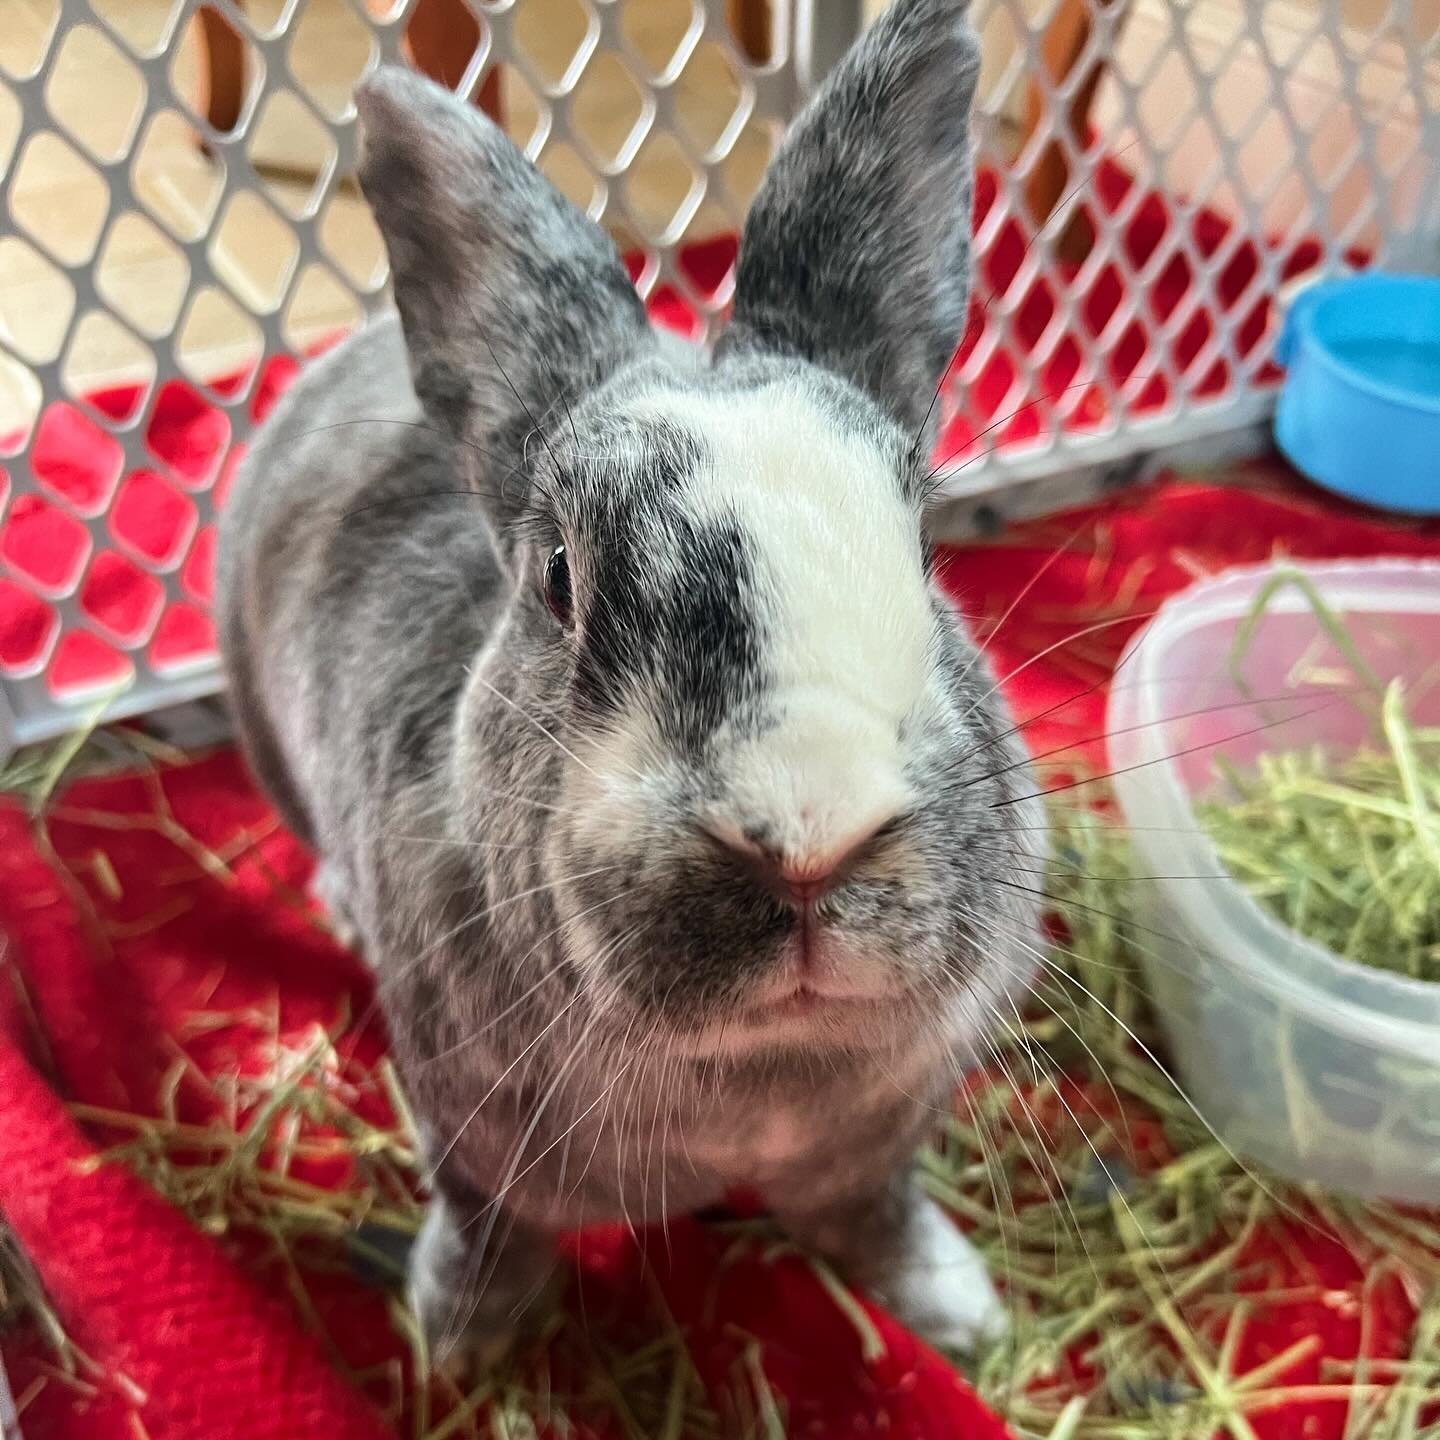 In addition to dogs &amp; cats, I also offer services for bunnies and other critters! 💖 This is Blaise, the sweetest bunny who can&rsquo;t get enough of treats, and he approves this message! 🐰🥕#BunnyLove #CritterCare